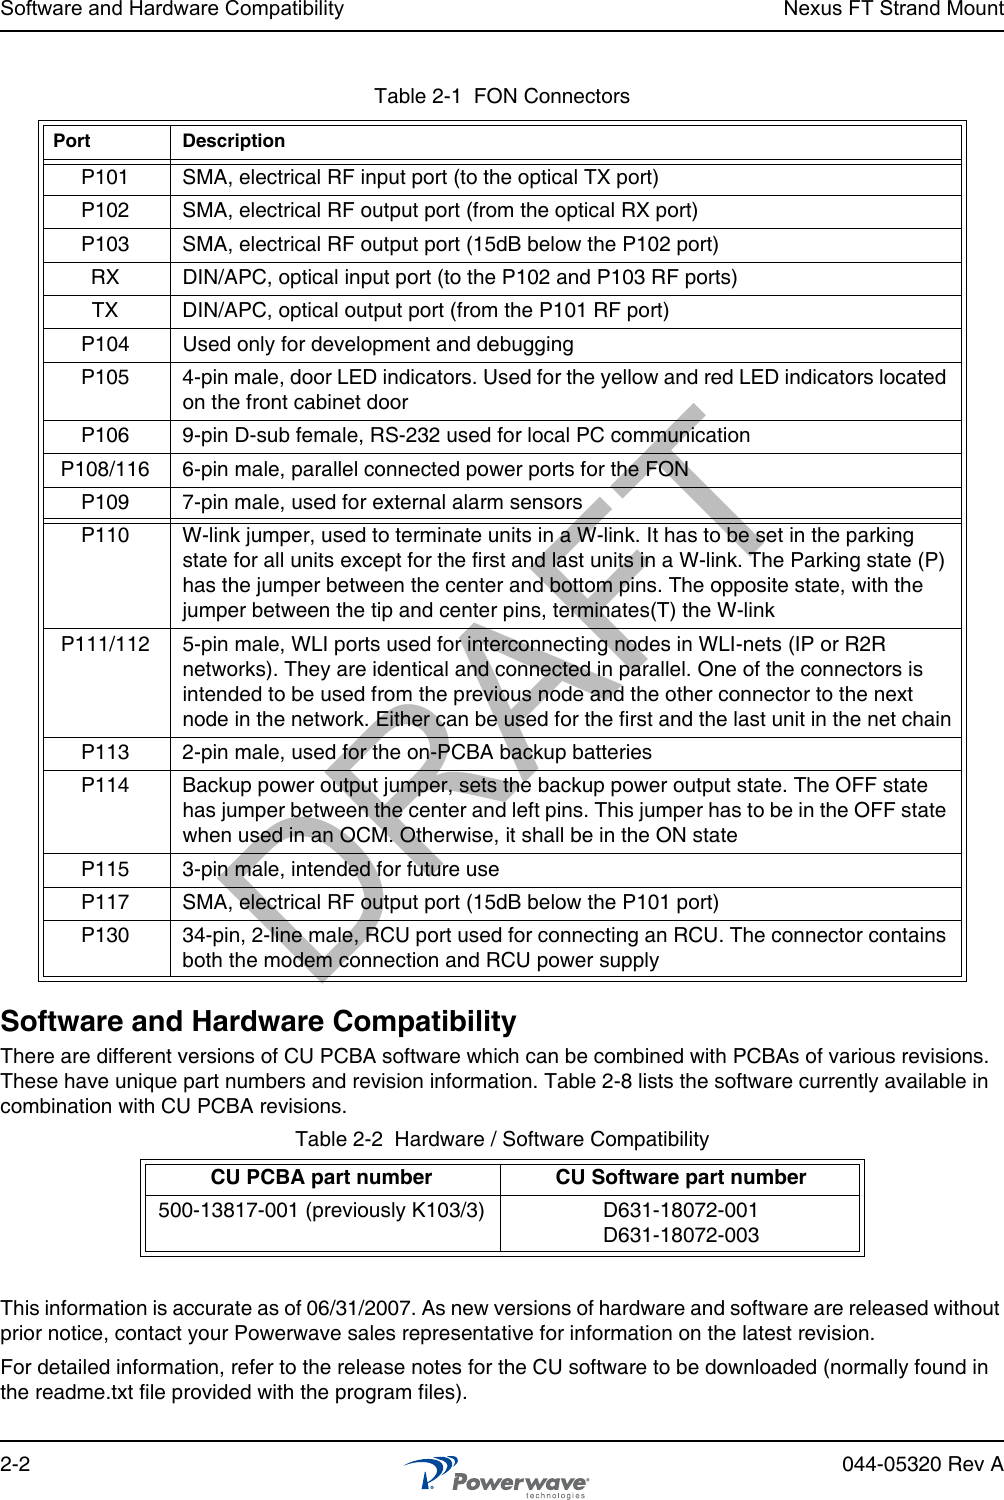 Software and Hardware Compatibility Nexus FT Strand Mount2-2 044-05320 Rev ASoftware and Hardware CompatibilityThere are different versions of CU PCBA software which can be combined with PCBAs of various revisions. These have unique part numbers and revision information. Table 2-8 lists the software currently available in combination with CU PCBA revisions.Table 2-2  Hardware / Software CompatibilityThis information is accurate as of 06/31/2007. As new versions of hardware and software are released without prior notice, contact your Powerwave sales representative for information on the latest revision.For detailed information, refer to the release notes for the CU software to be downloaded (normally found in the readme.txt file provided with the program files).Table 2-1  FON ConnectorsPort DescriptionP101 SMA, electrical RF input port (to the optical TX port)P102 SMA, electrical RF output port (from the optical RX port)P103 SMA, electrical RF output port (15dB below the P102 port)RX DIN/APC, optical input port (to the P102 and P103 RF ports)TX DIN/APC, optical output port (from the P101 RF port)P104 Used only for development and debuggingP105 4-pin male, door LED indicators. Used for the yellow and red LED indicators located on the front cabinet doorP106 9-pin D-sub female, RS-232 used for local PC communicationP108/116 6-pin male, parallel connected power ports for the FONP109 7-pin male, used for external alarm sensorsP110 W-link jumper, used to terminate units in a W-link. It has to be set in the parking state for all units except for the first and last units in a W-link. The Parking state (P) has the jumper between the center and bottom pins. The opposite state, with the jumper between the tip and center pins, terminates(T) the W-linkP111/112 5-pin male, WLI ports used for interconnecting nodes in WLI-nets (IP or R2R networks). They are identical and connected in parallel. One of the connectors is intended to be used from the previous node and the other connector to the next node in the network. Either can be used for the first and the last unit in the net chainP113 2-pin male, used for the on-PCBA backup batteriesP114 Backup power output jumper, sets the backup power output state. The OFF state has jumper between the center and left pins. This jumper has to be in the OFF state when used in an OCM. Otherwise, it shall be in the ON stateP115 3-pin male, intended for future useP117 SMA, electrical RF output port (15dB below the P101 port)P130 34-pin, 2-line male, RCU port used for connecting an RCU. The connector contains both the modem connection and RCU power supplyCU PCBA part number CU Software part number500-13817-001 (previously K103/3) D631-18072-001D631-18072-003DRAFT